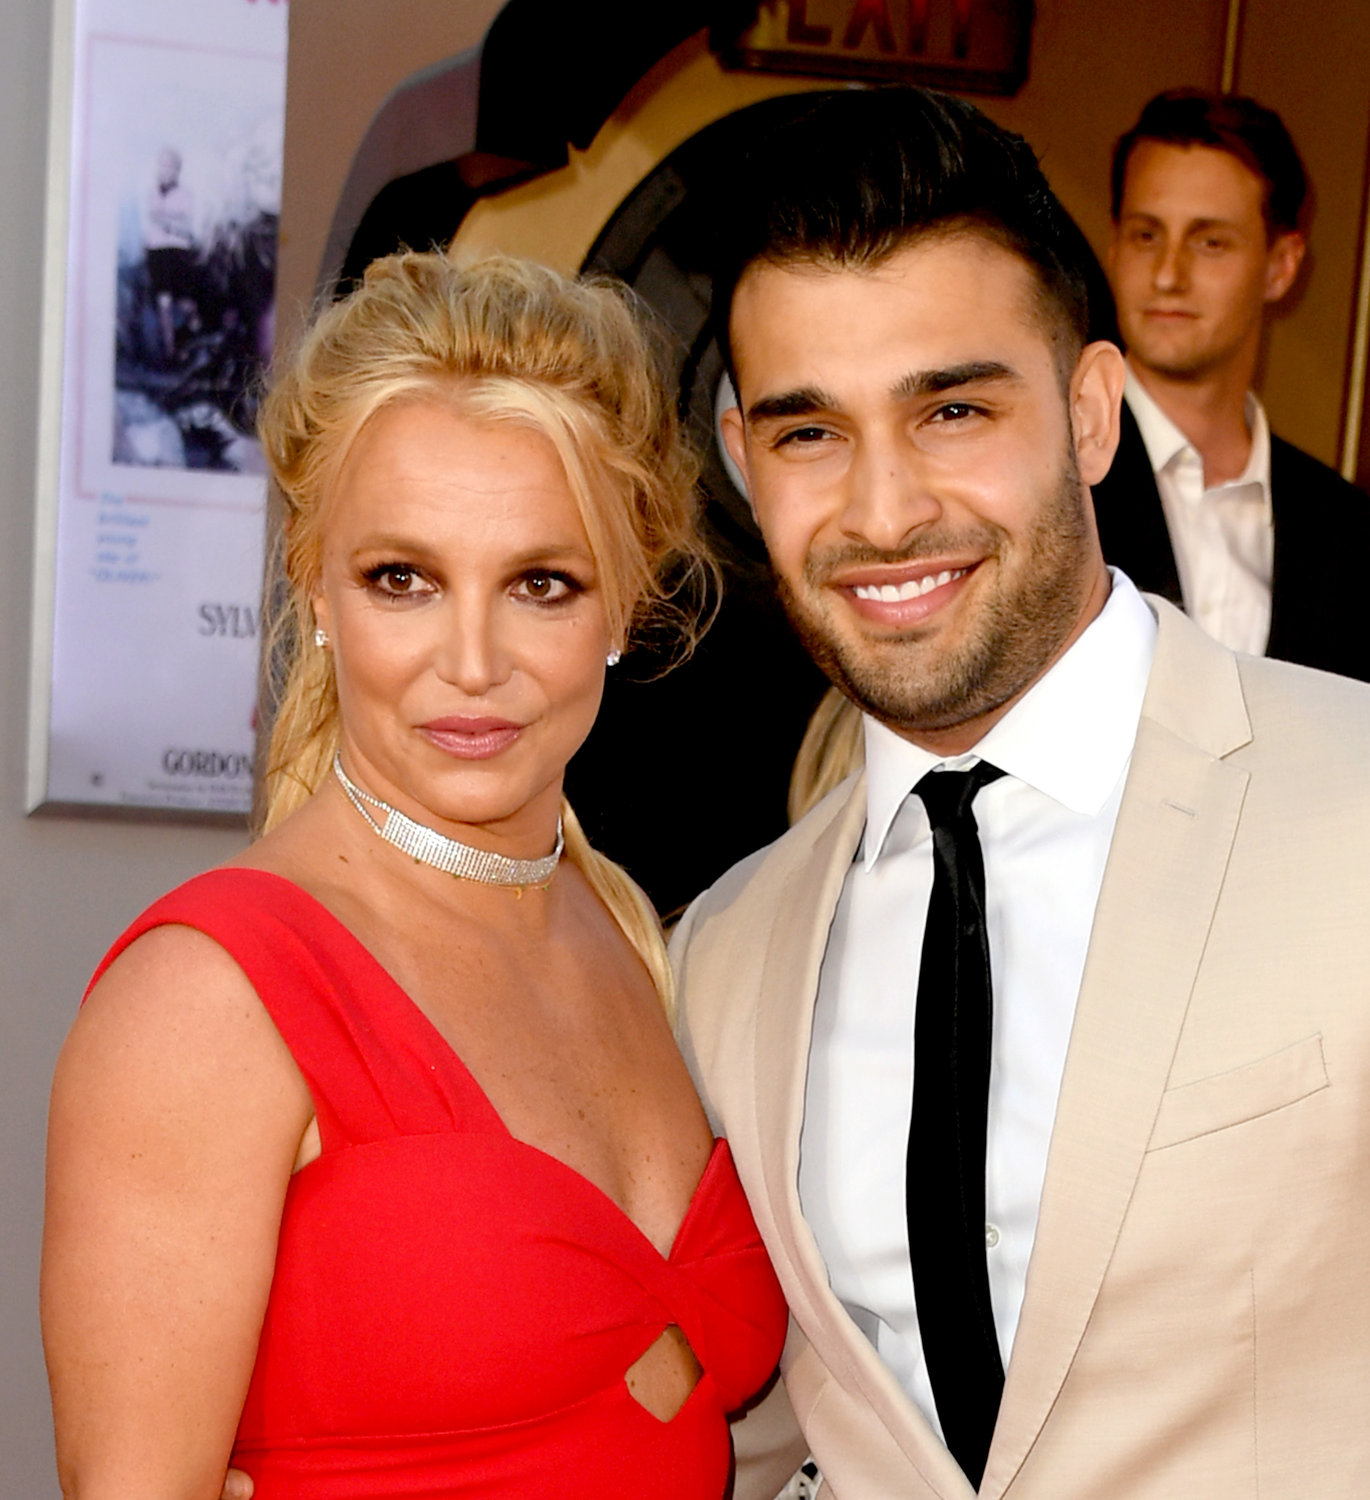 In this photo from July 22, 2019, Britney Spears (left) and Sam Asghari arrive at the premiere of Sony Pictures' "One Upon A Time...In Hollywood" at the Chinese Theatre in Hollywood, California. (Kevin Winter/Getty Images/TNS)